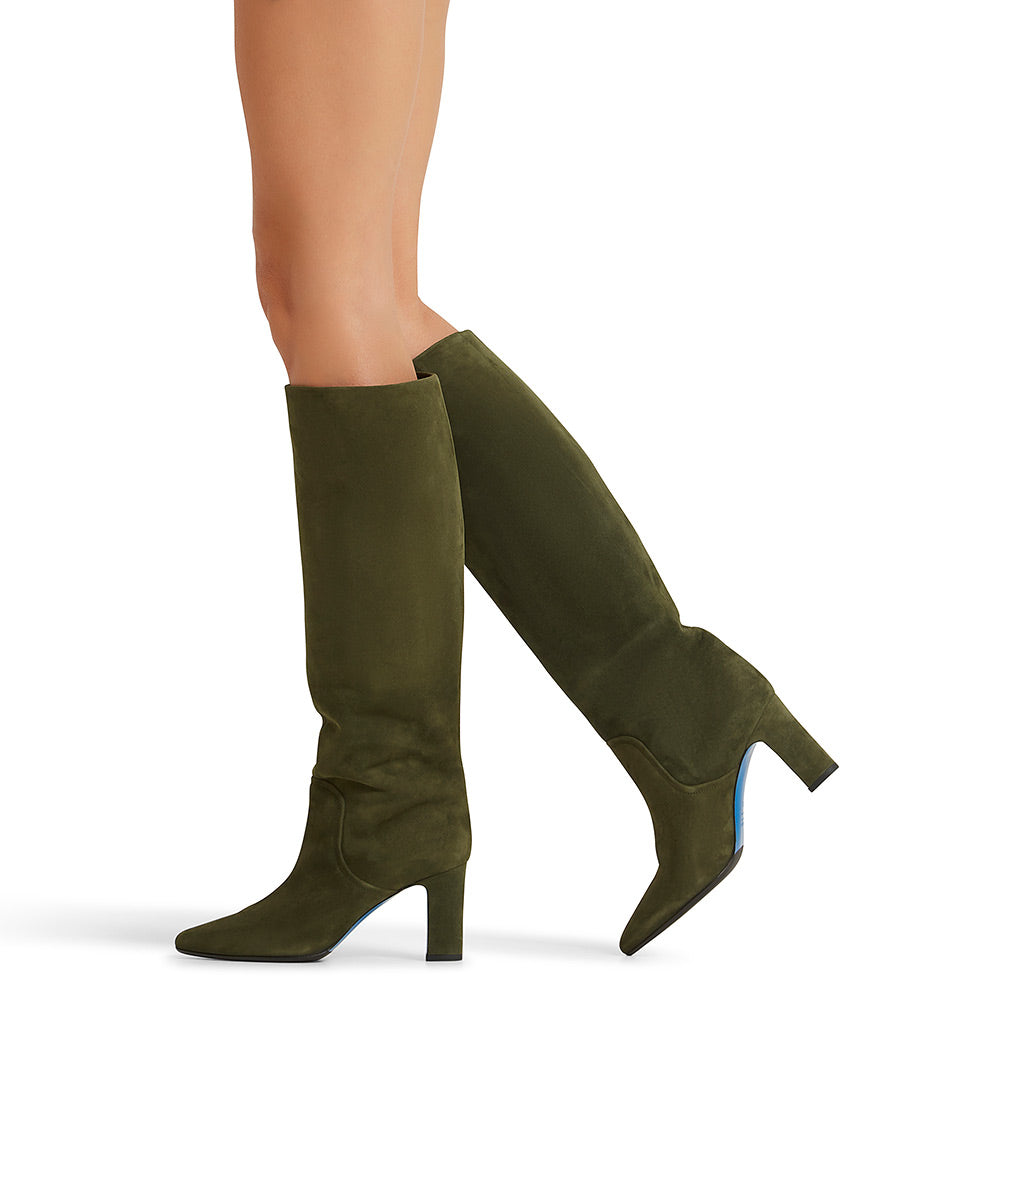 Green suede boots